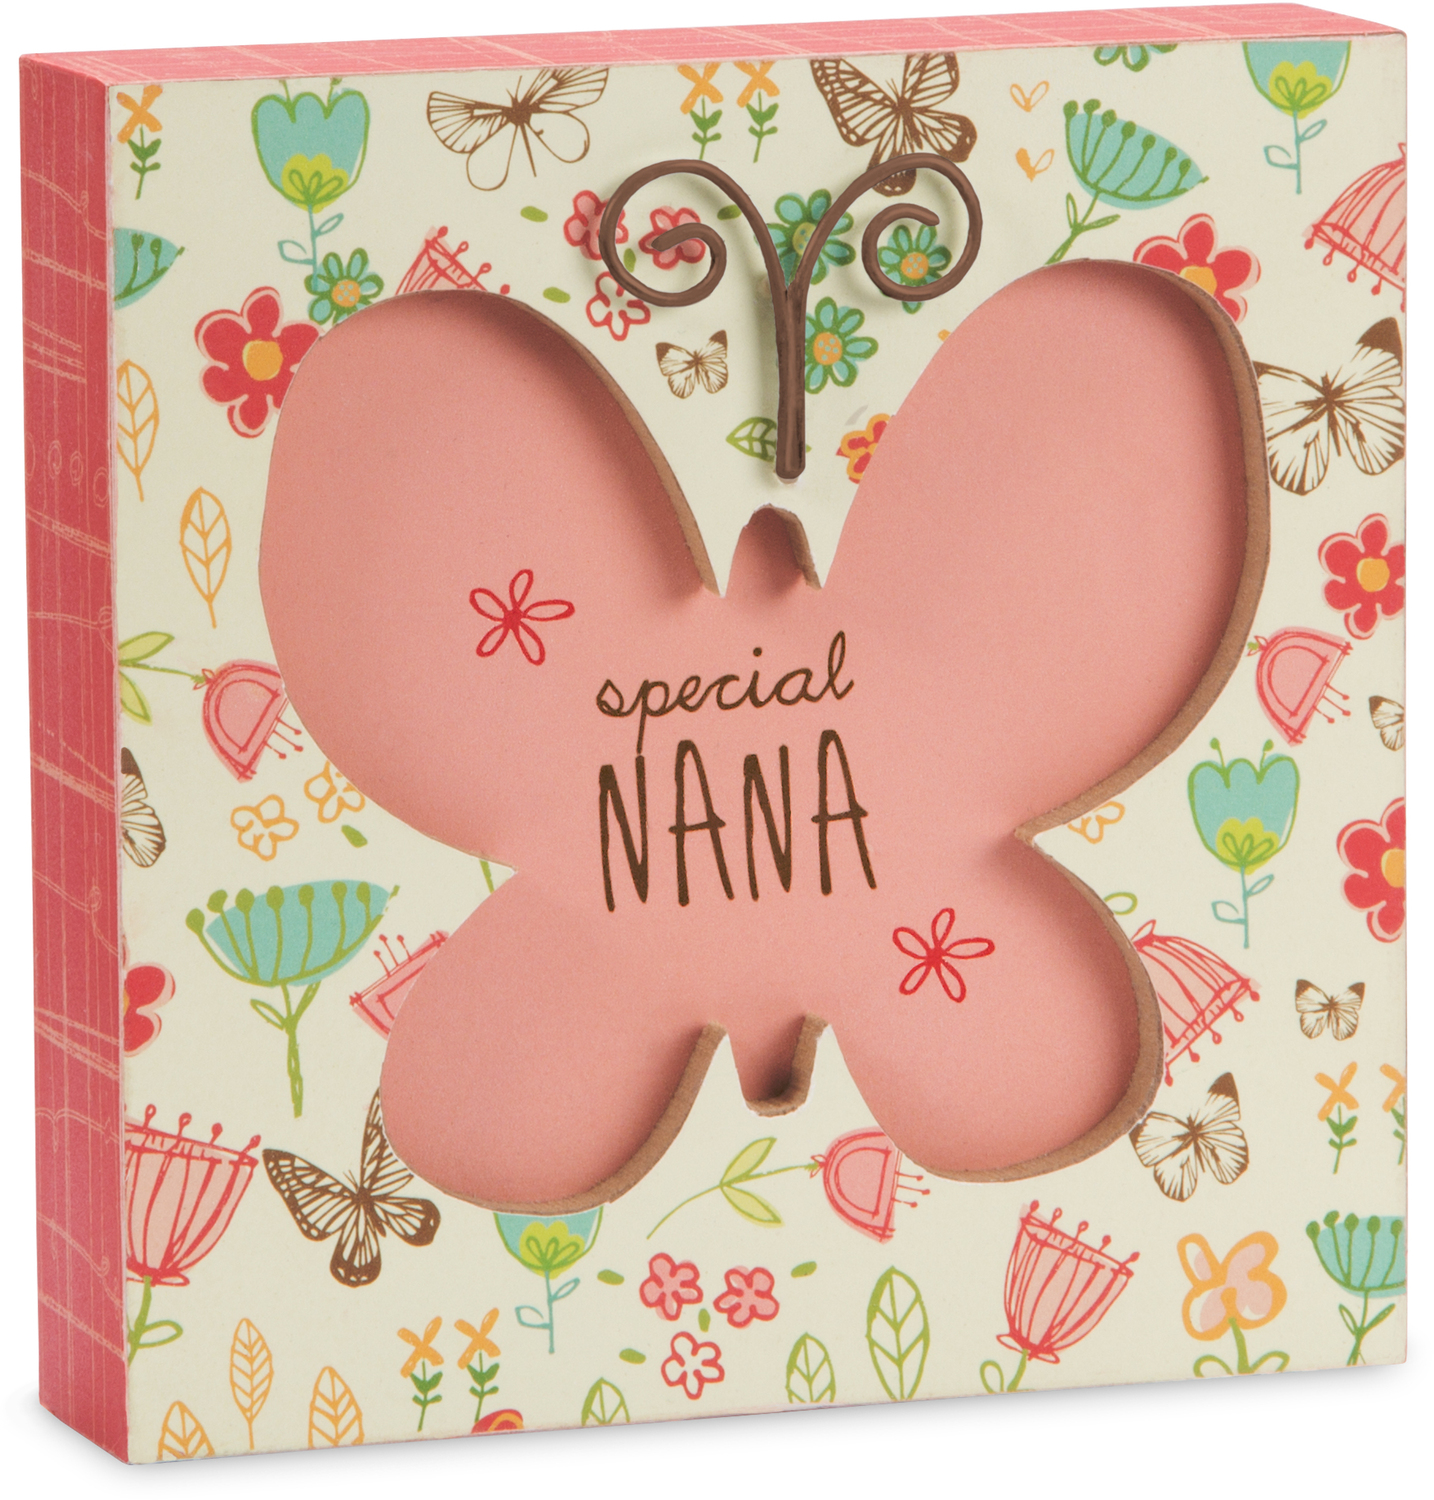 Nana by A Mother's Love by Amylee Weeks - Nana - 4.5" x 4.5" Plaque